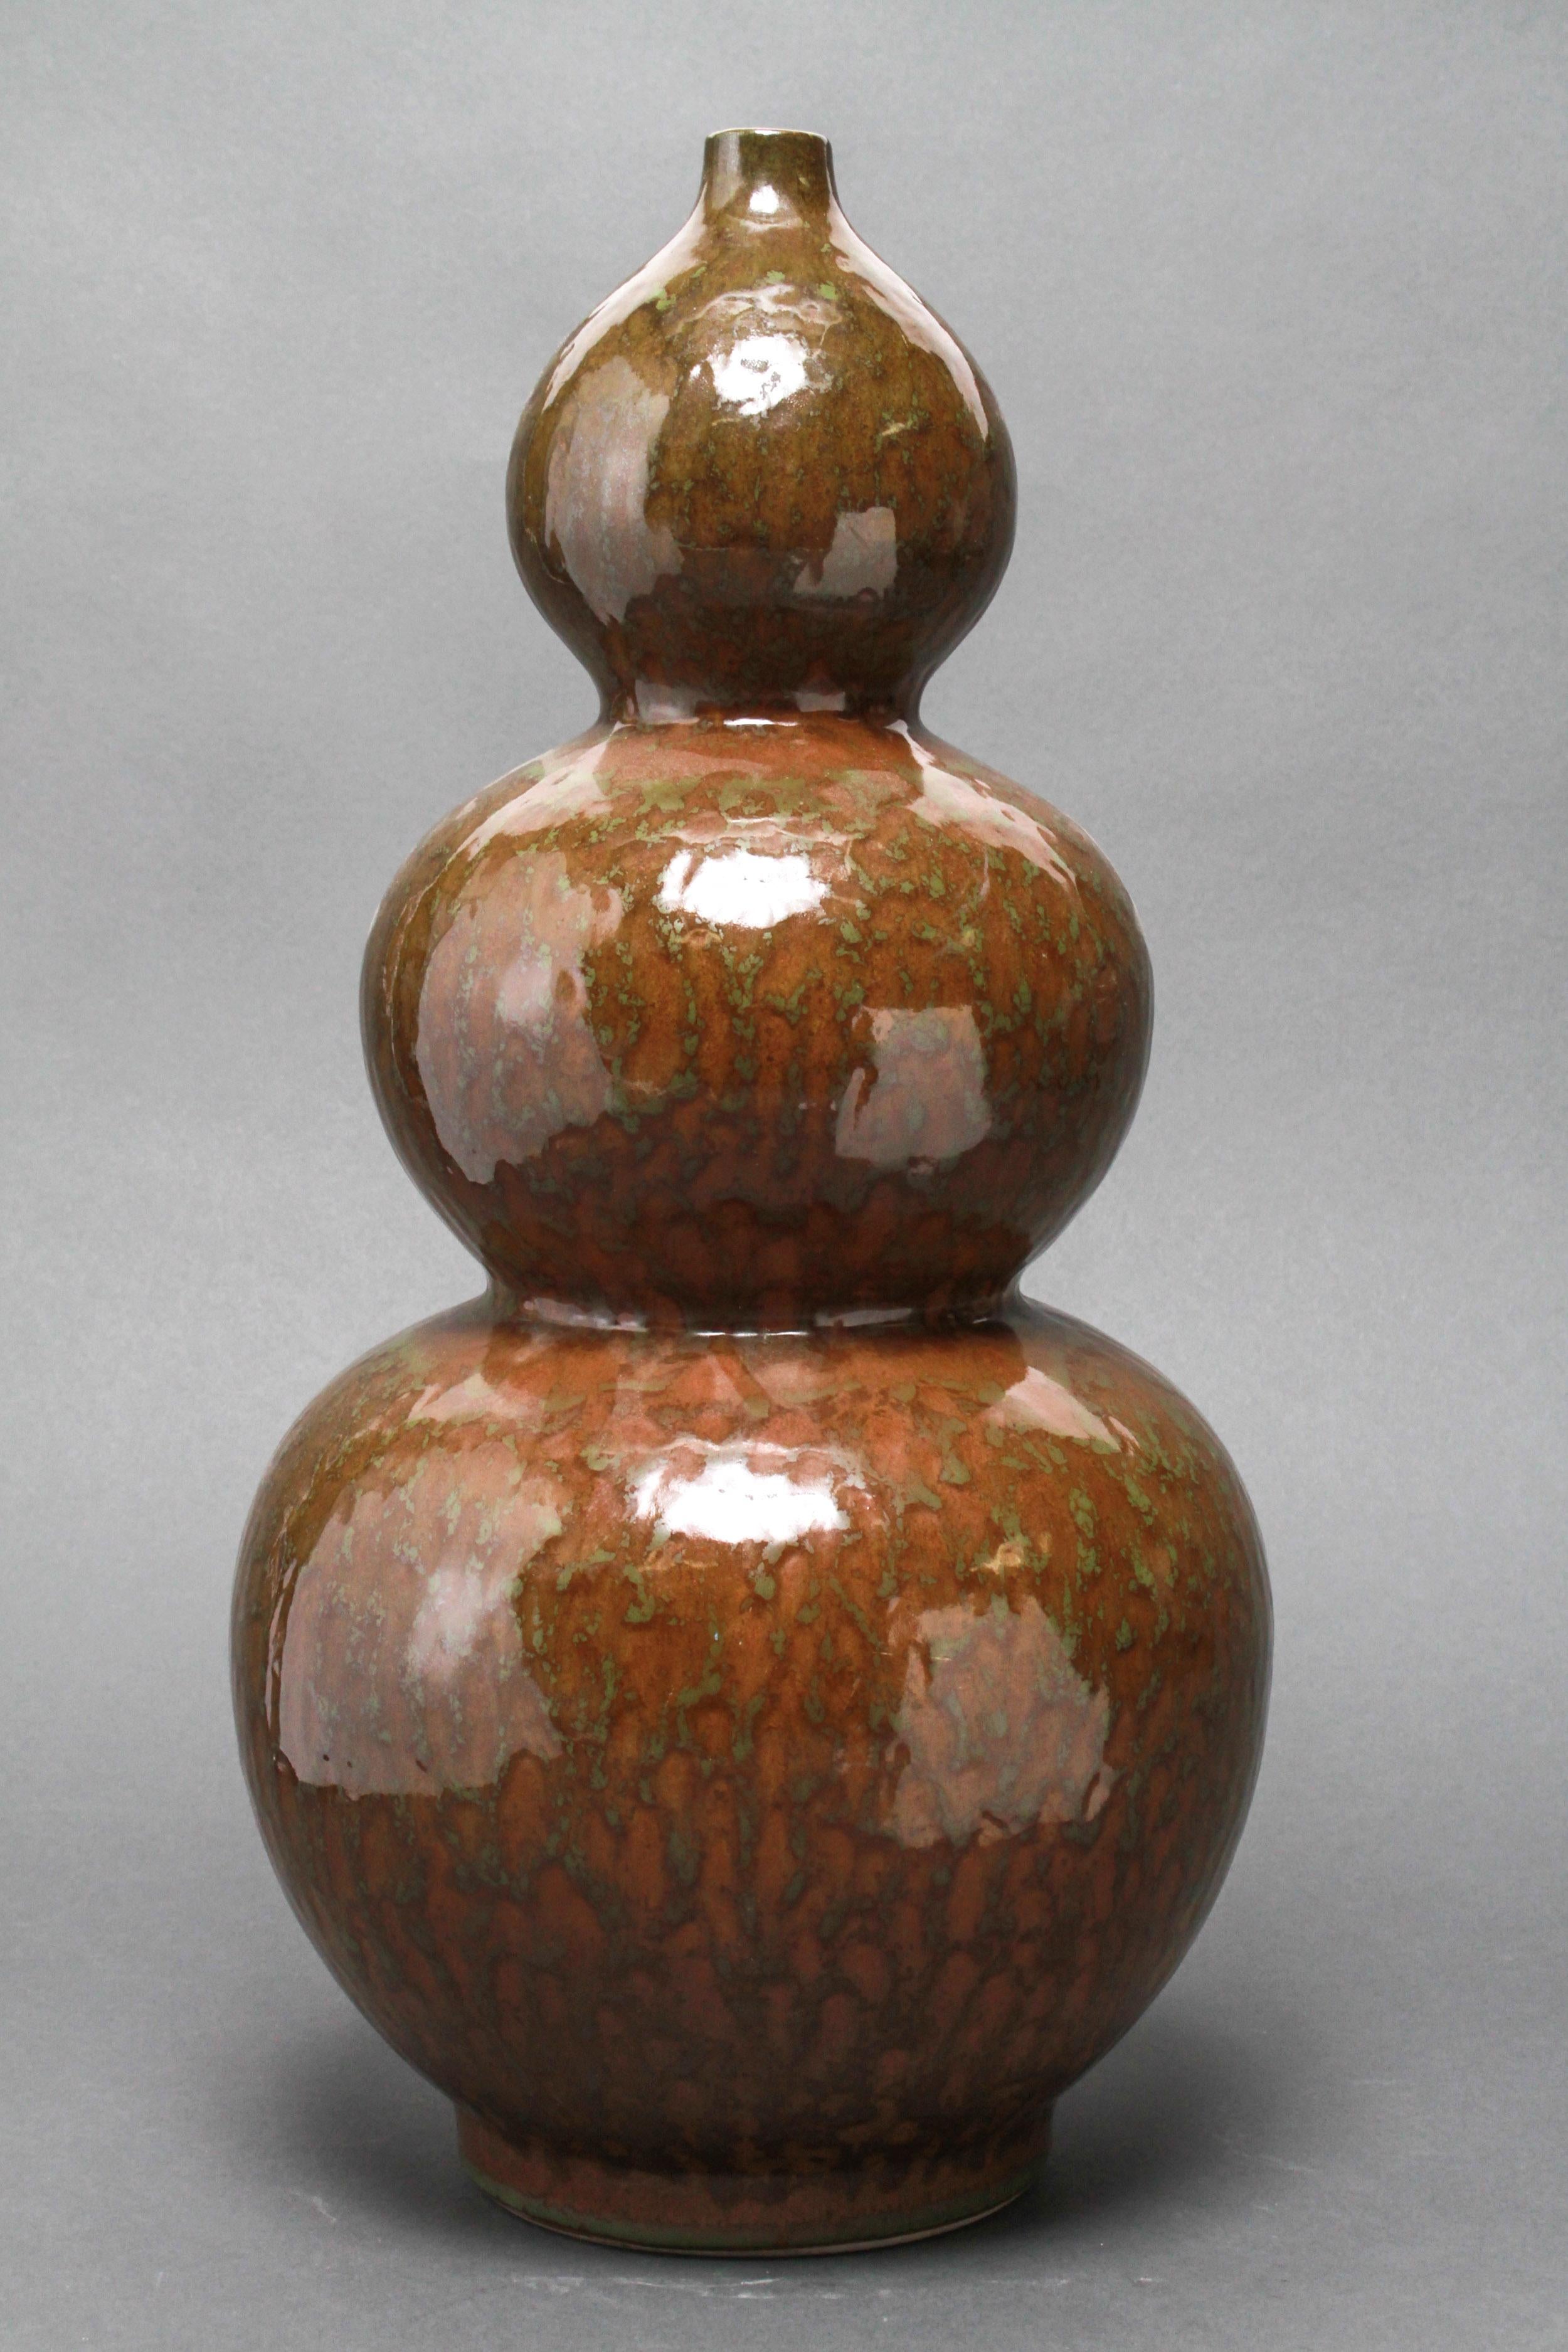 Mid-Century Modern triple gourd shaped art pottery vase with a green and brown glaze. The piece is in great vintage condition with age-appropriate wear.